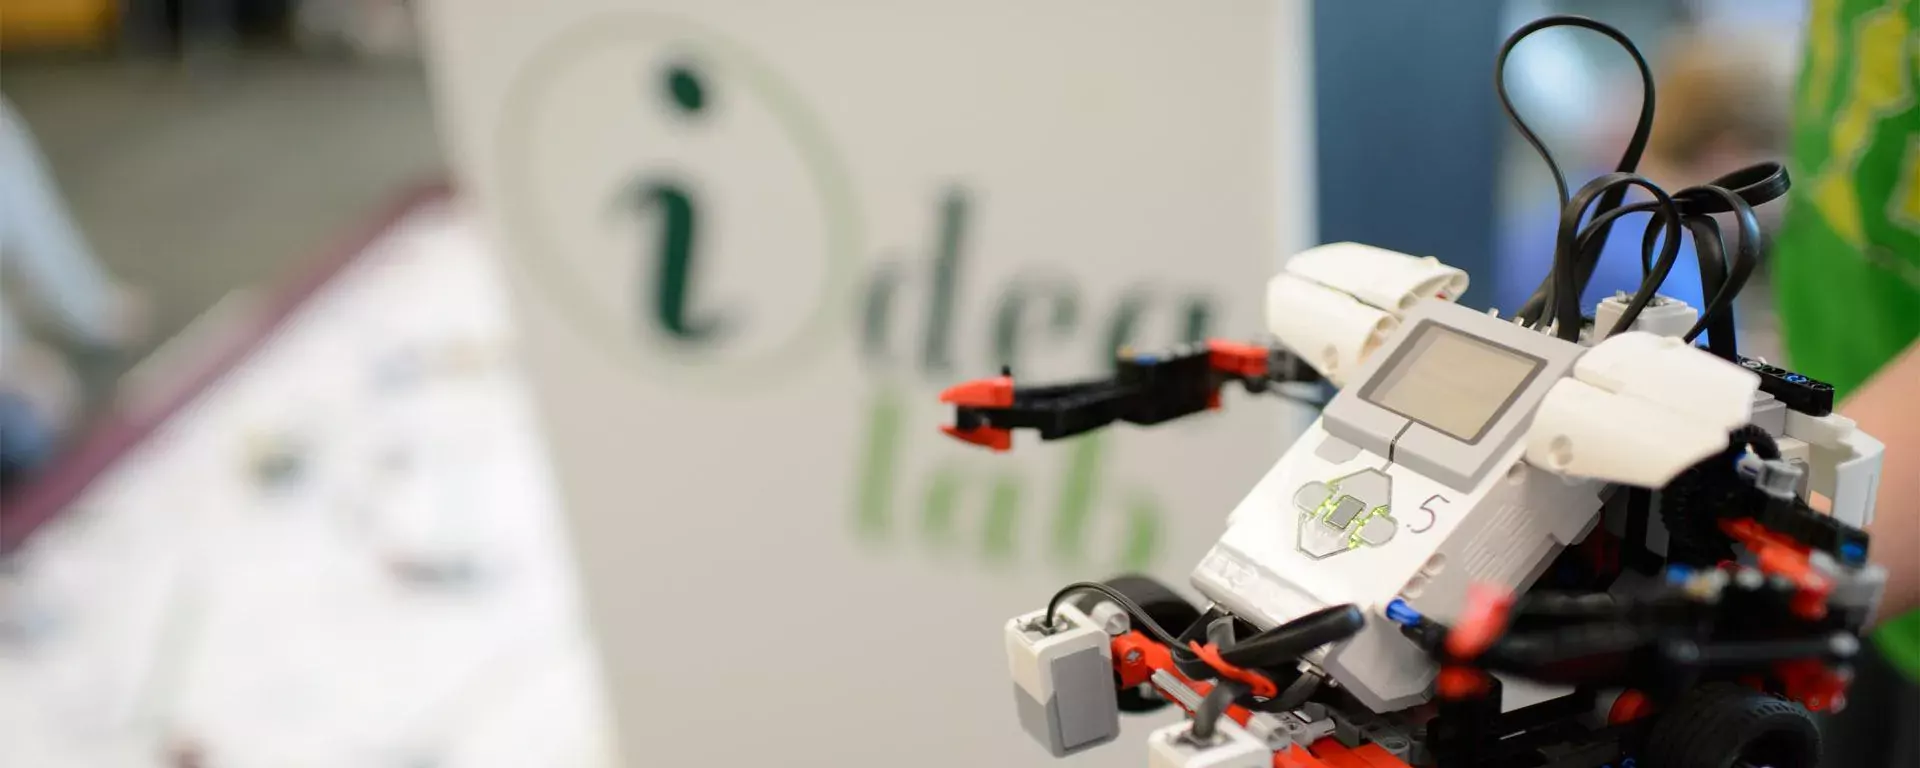 Image of a robot in front of the idea lab podium